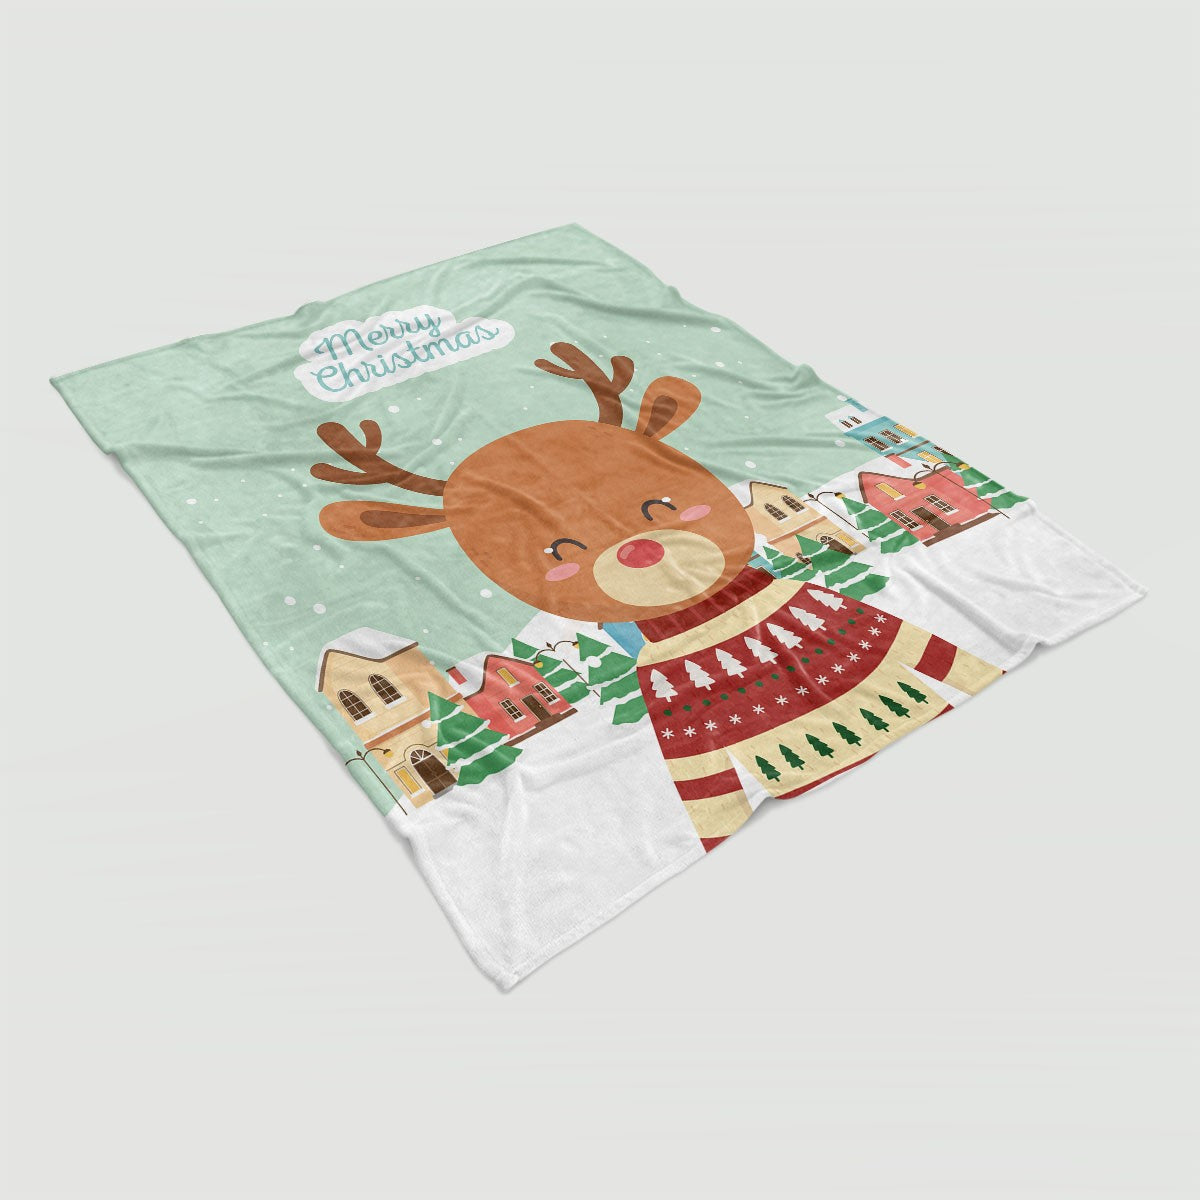 Decors Market Images for Products Throw Blanket